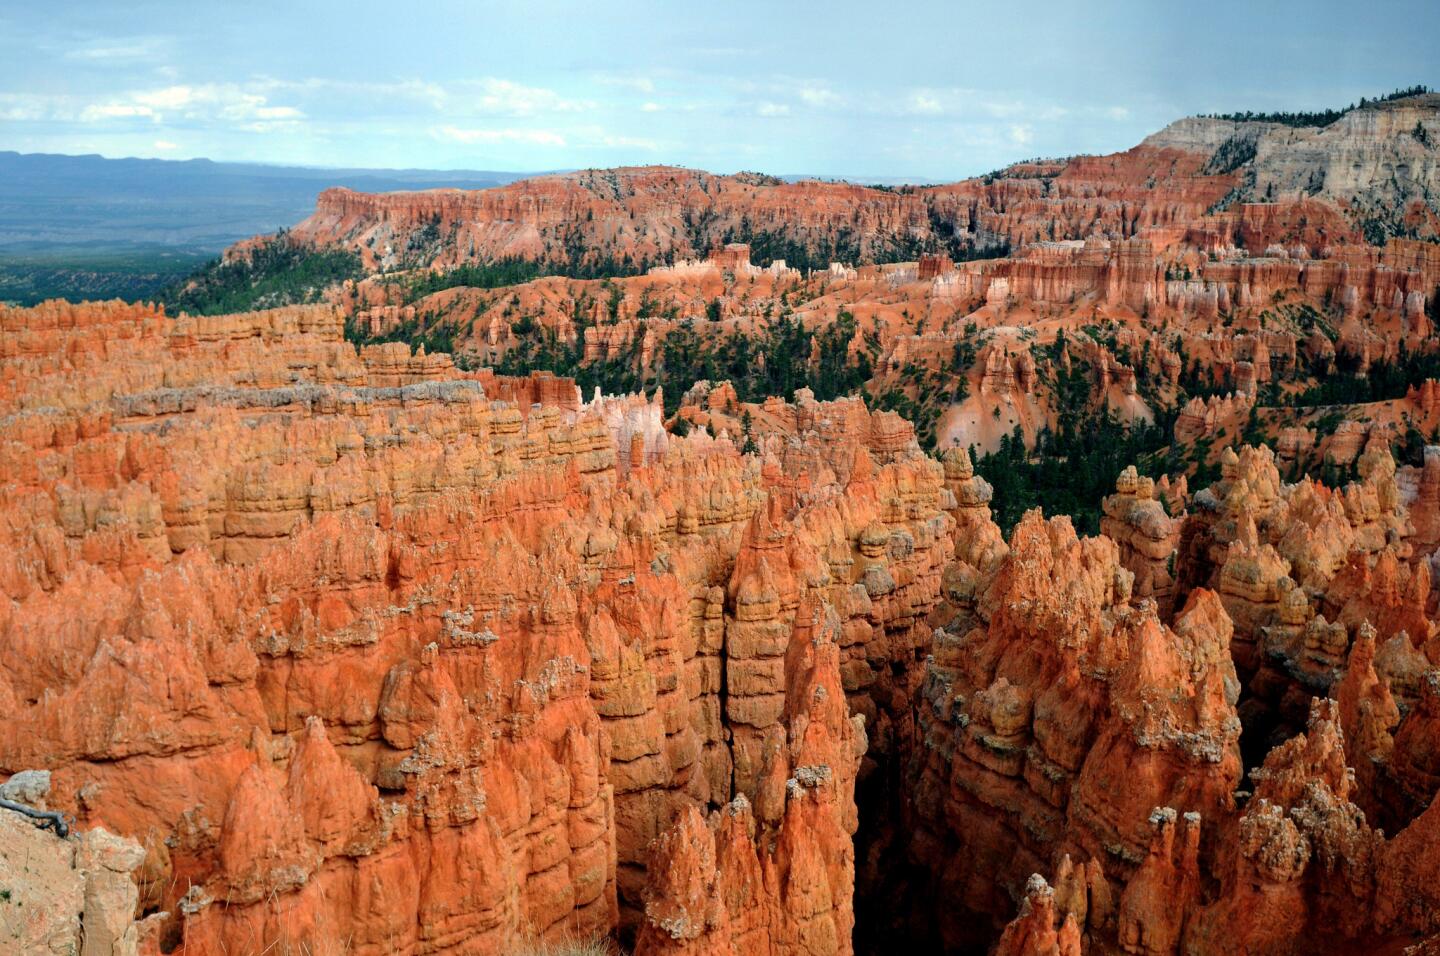 View of the Bryce Canyon National Park, Utah. Bryce Canyon is a small national park in southwestern Utah and is famous for its worldly unique geology, consisting of a series of horseshoe-shaped amphitheaters carved from the eastern edge of the Paunsaugunt Plateau in southern Utah.